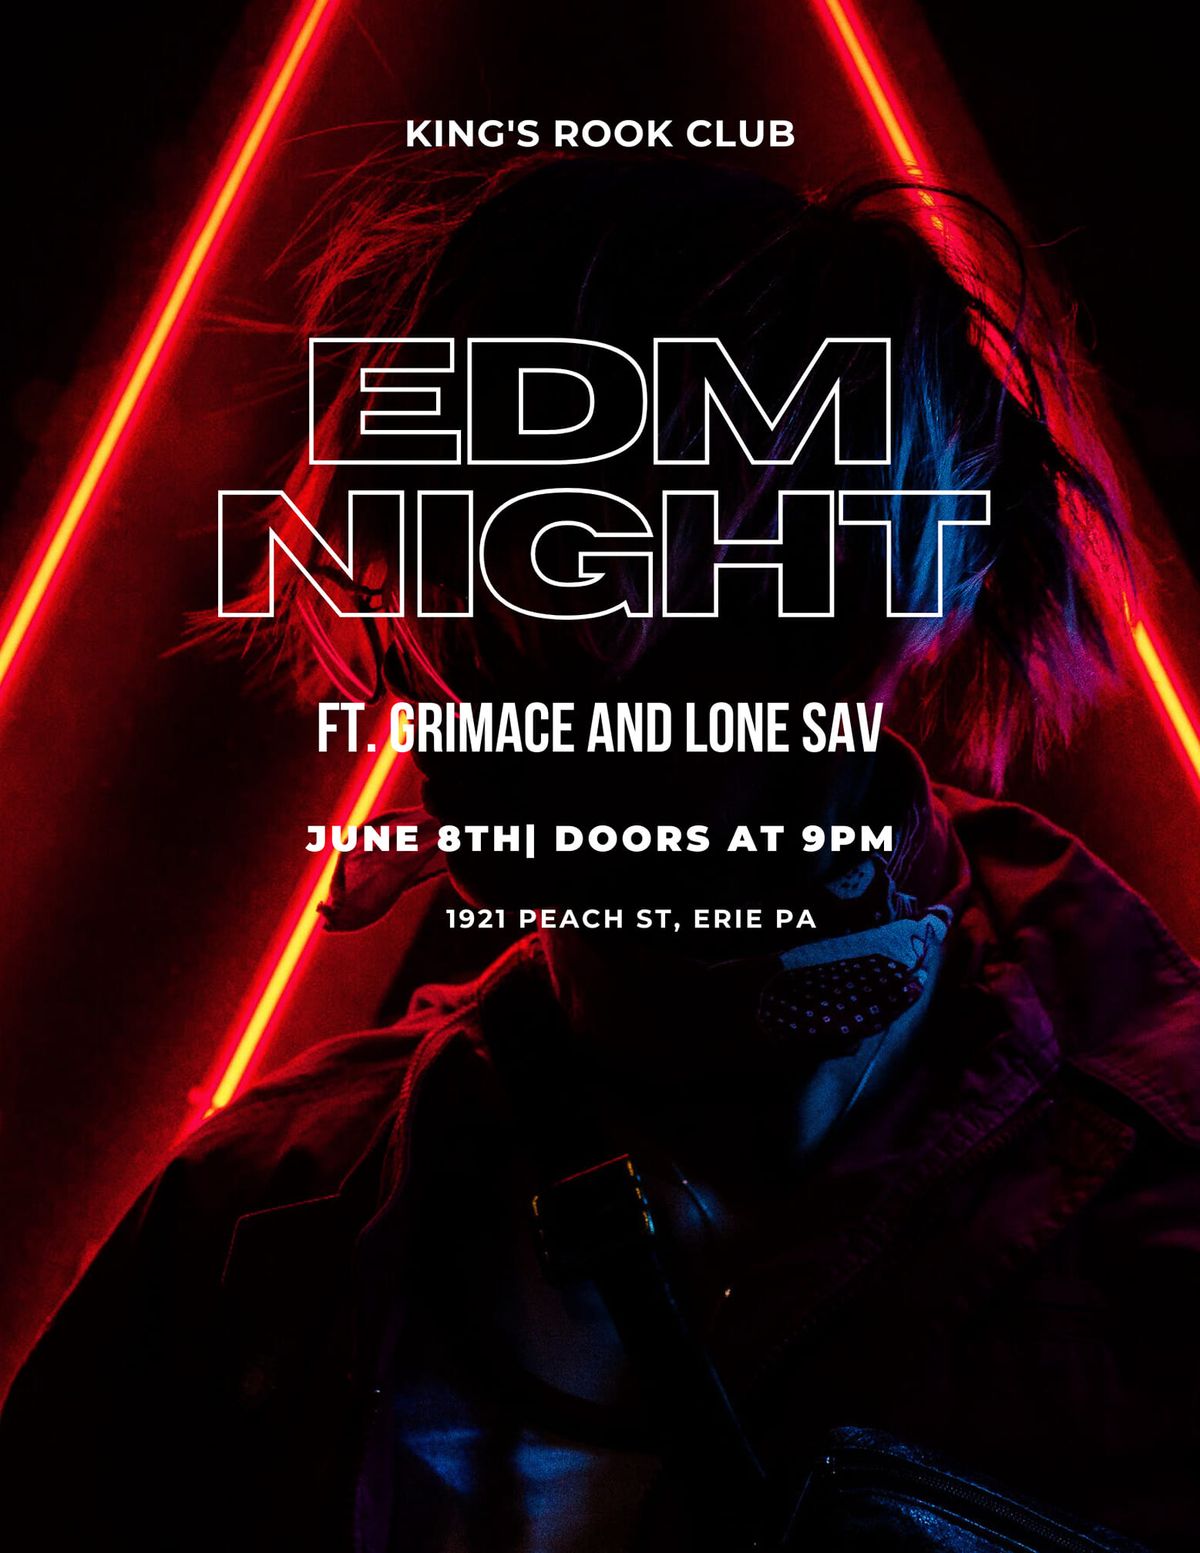 King's Rook Club EDM NIGHT! ft. Grimace and Lone Sav